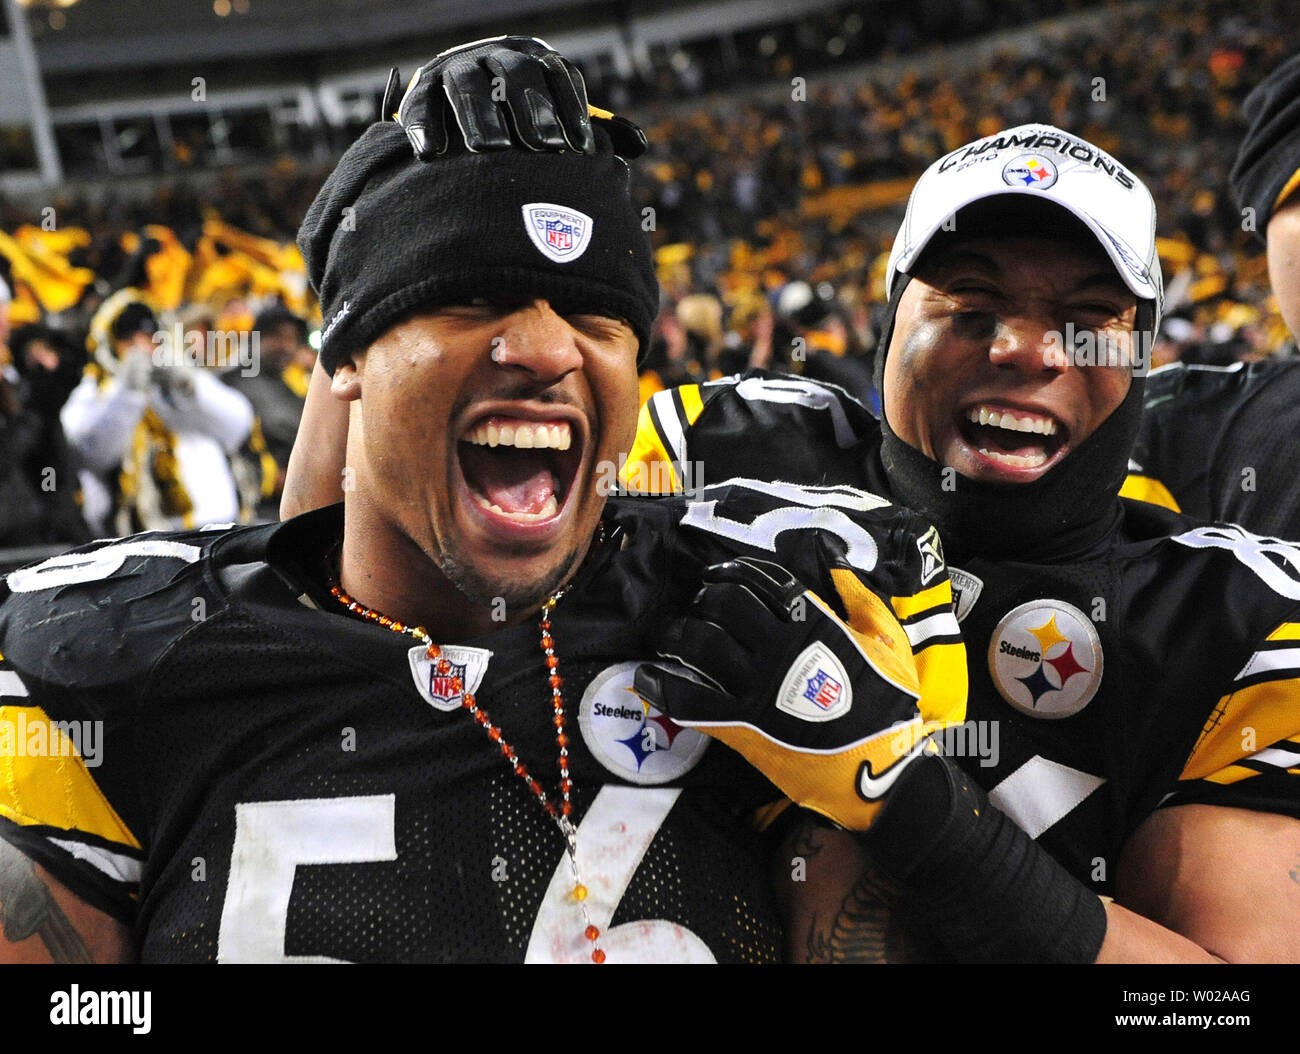 Pittsburgh Steelers' linebacker LaMarr Woodley (56) celebrates with teammate wide receiver Hines Ward after the Steelers defeated the New York Jets 24-19 winning the AFC Championship at Heinz Field in Pittsburgh, Pennsylvania on January 23, 2011. The Steelers will face the Green Bay Packers in Super Bowl XLV.  UPI/Kevin Dietsch Stock Photo